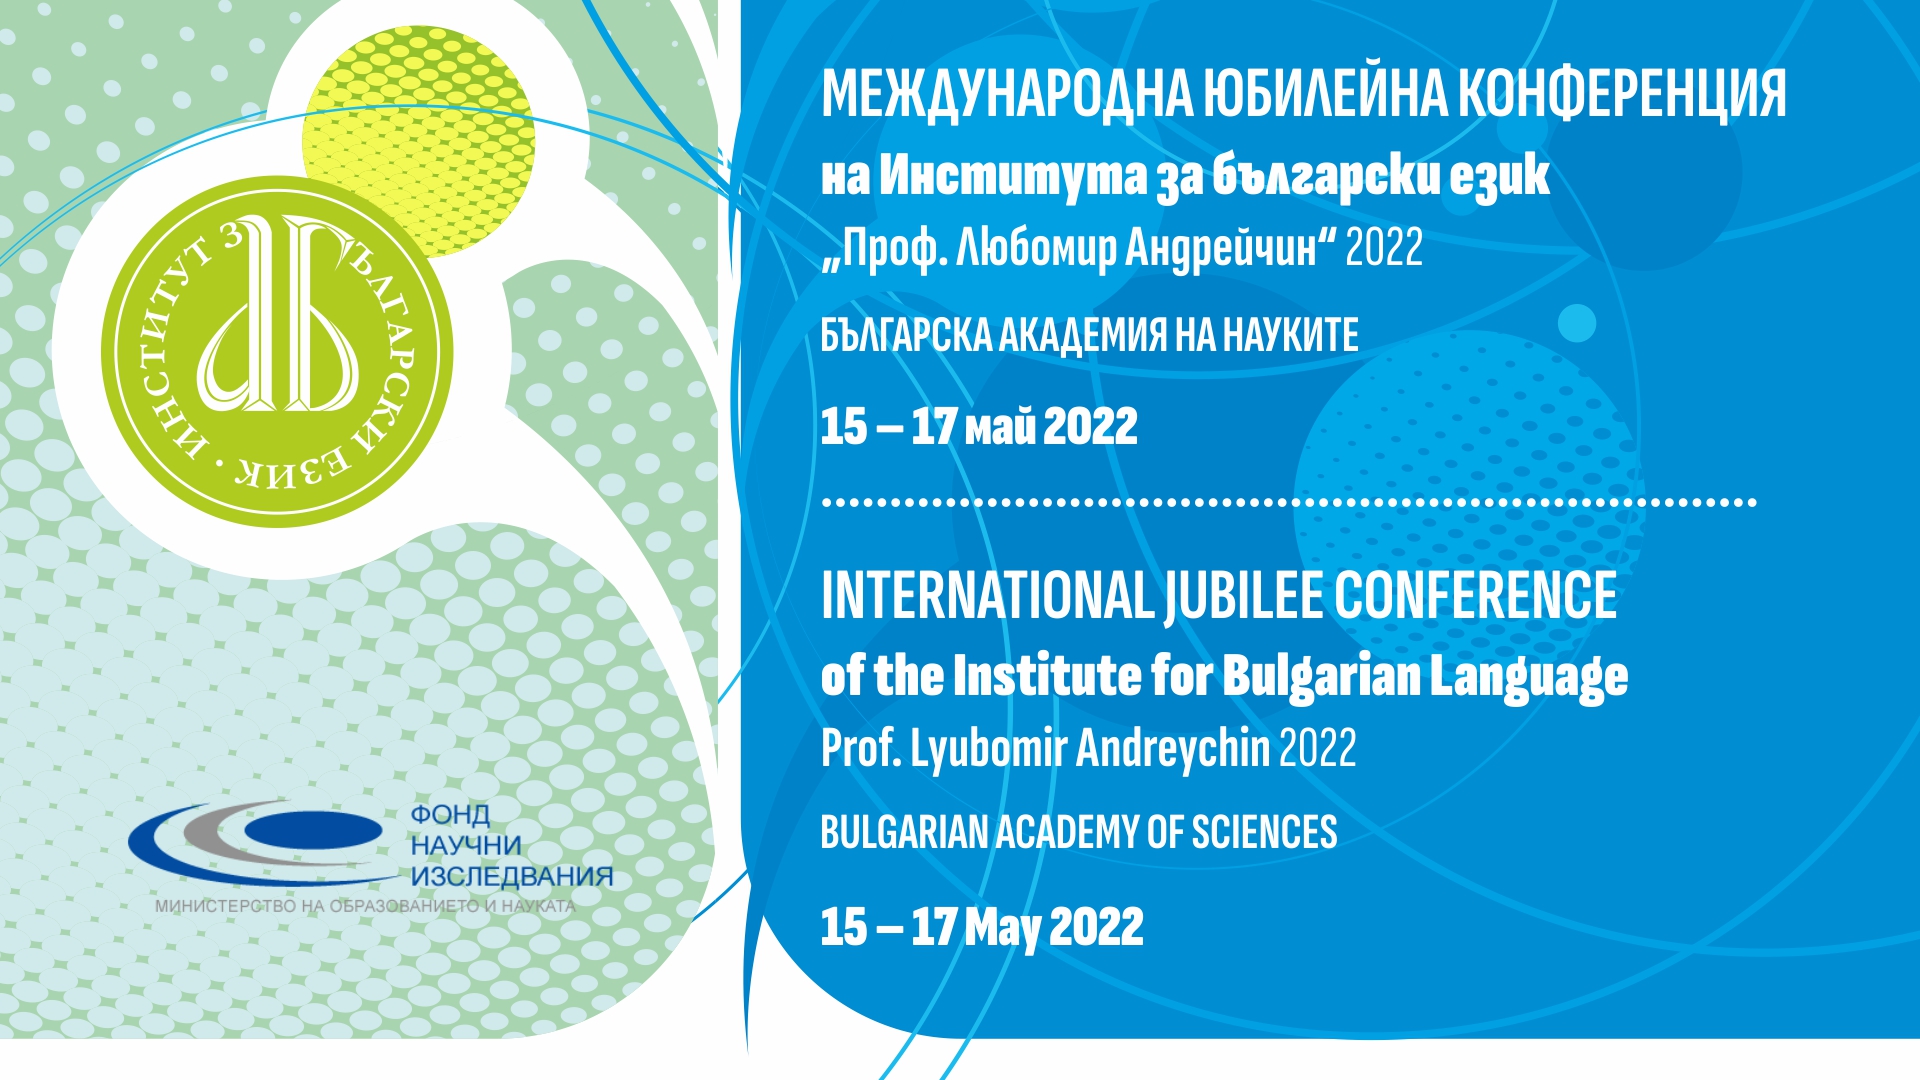 International Jubilee Conference of the Institute for Bulgarian Language 2022